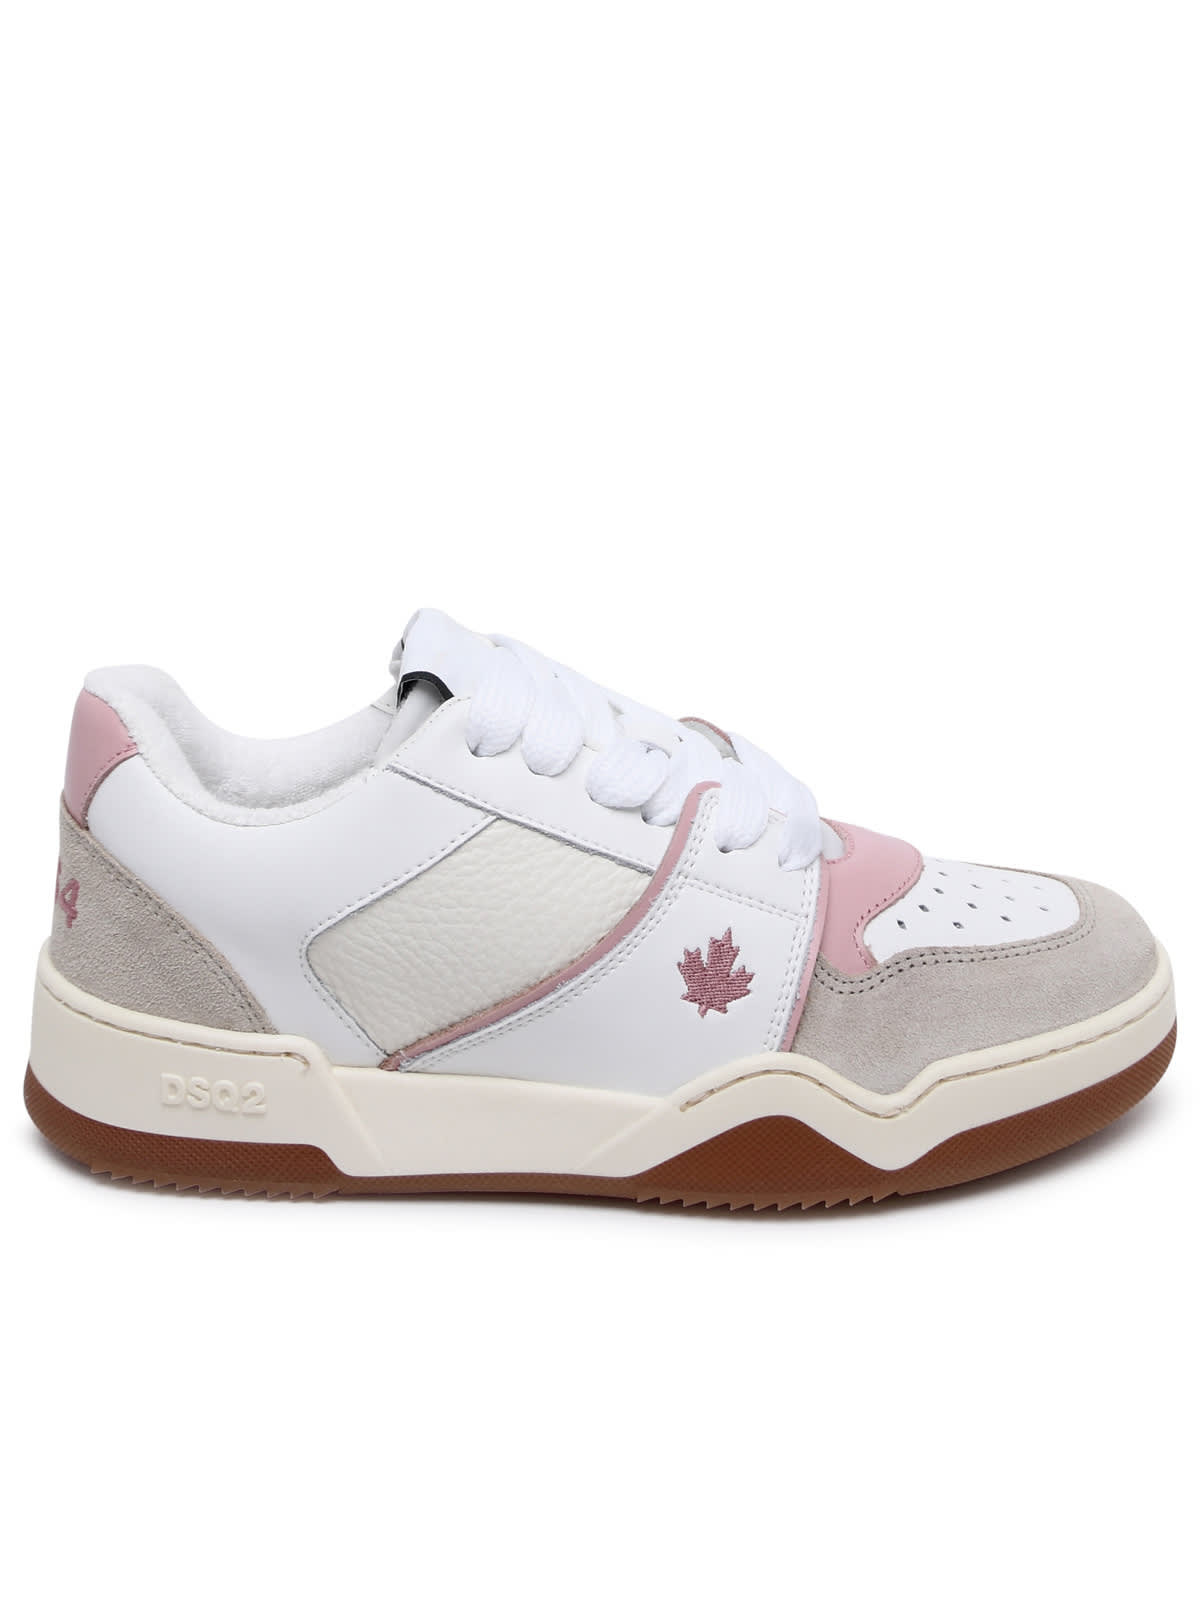 Dsquared2 Spiker White Leather Sneakers In Multicolor